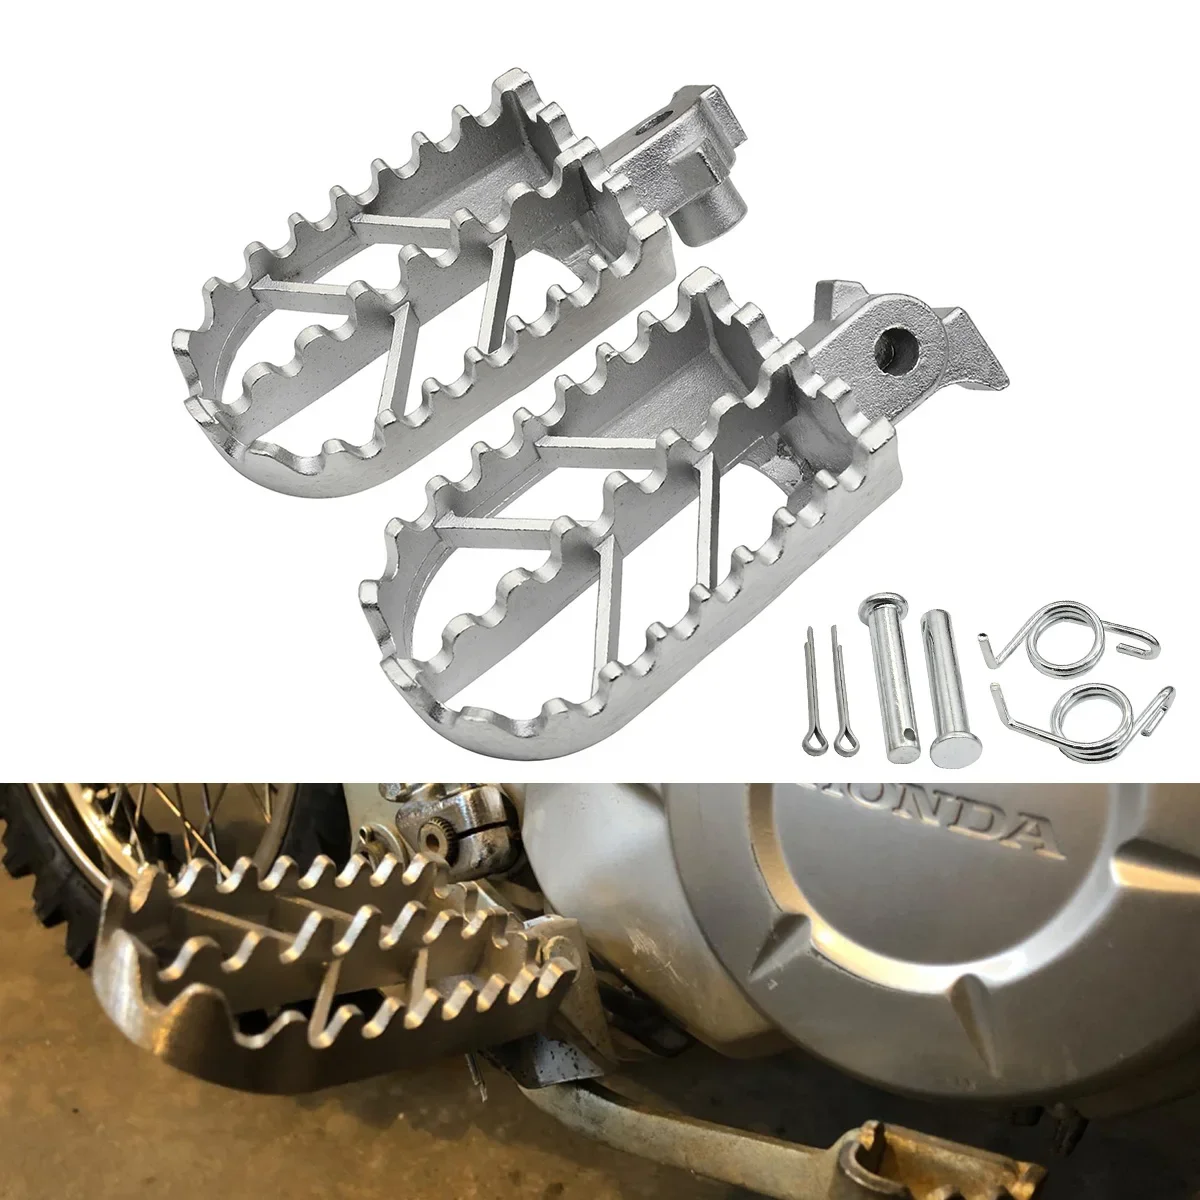 Motocross Stainless Steel Foot Pegs Rests Pedals Footpegs For Honda XR50... - $34.08